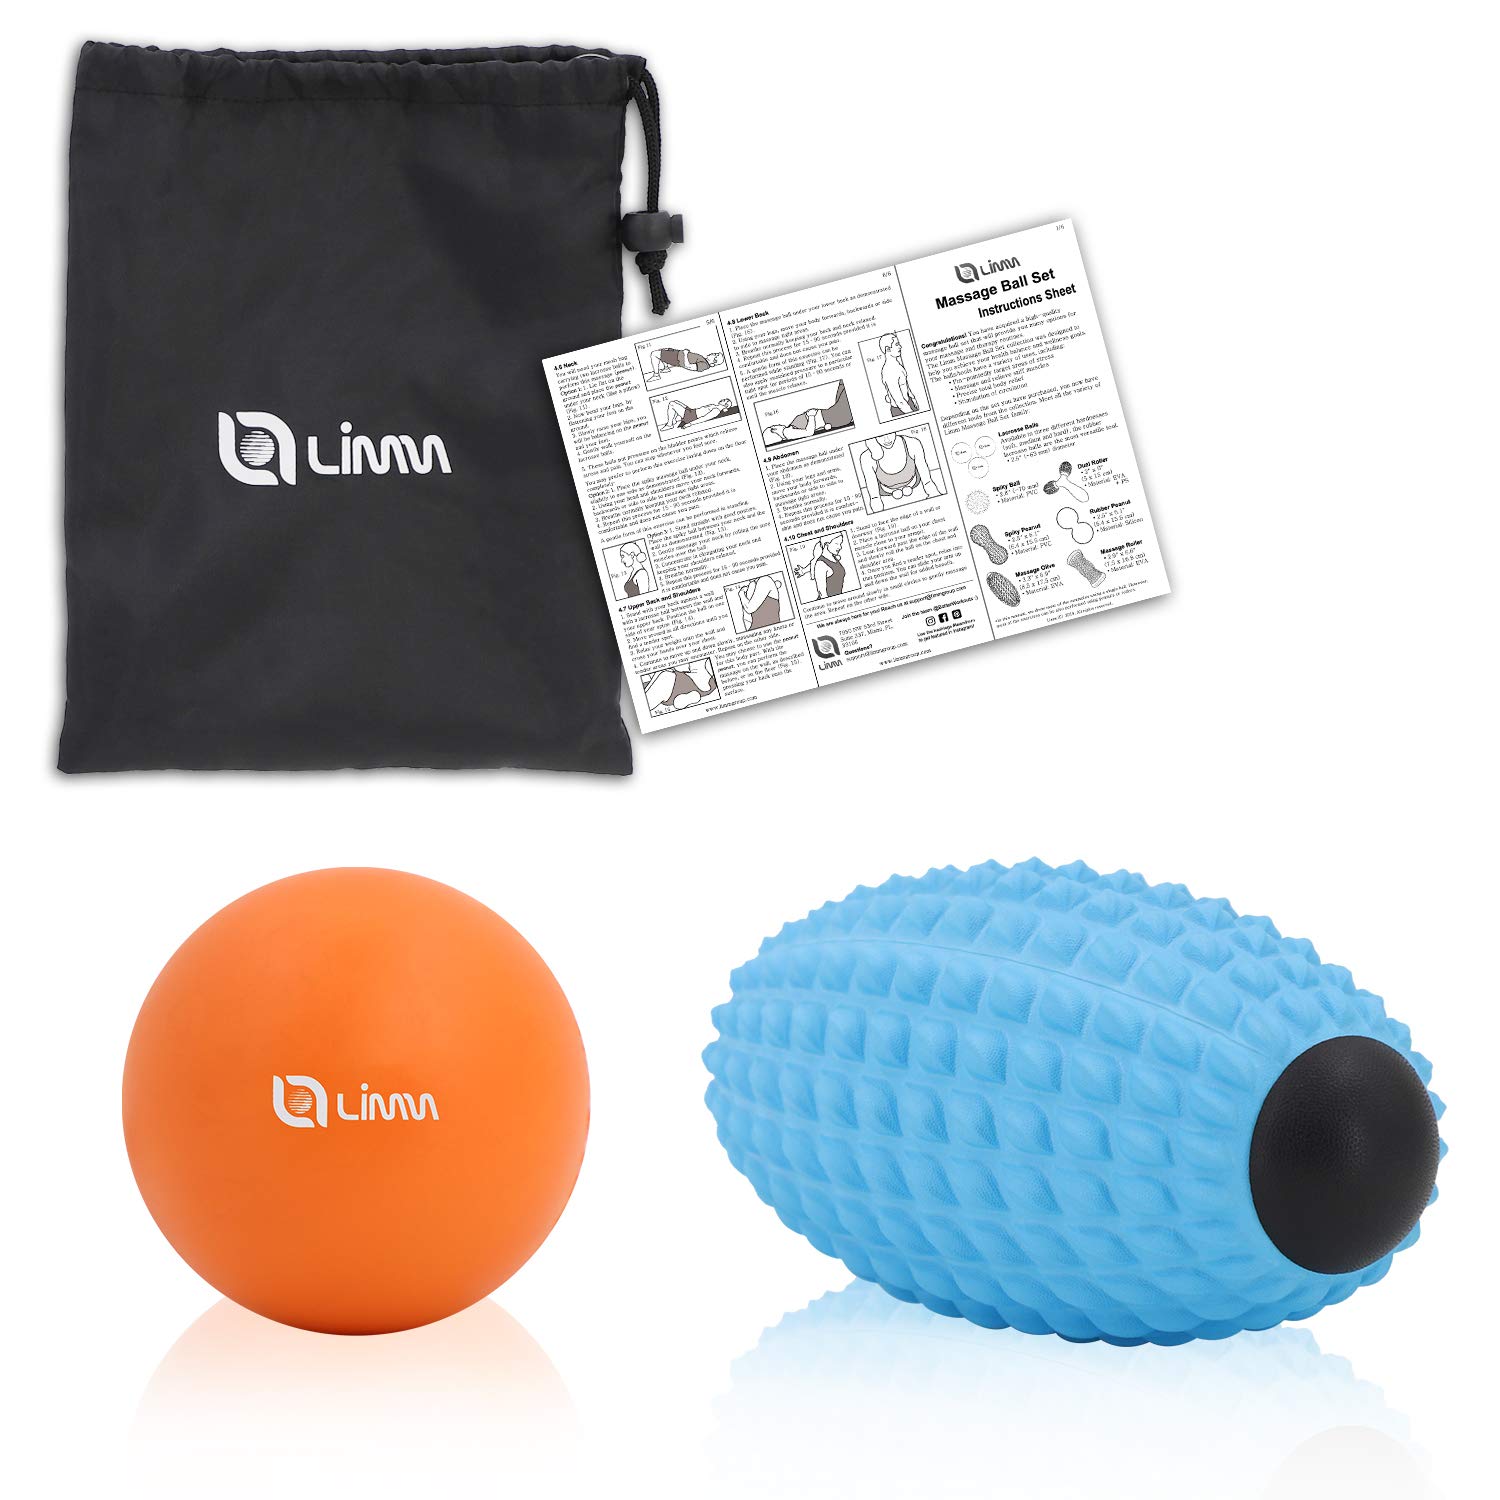 Includes 2 Spiky Balls and 1 Lacrosse Ball 11Force Premium Massage Ball Set 